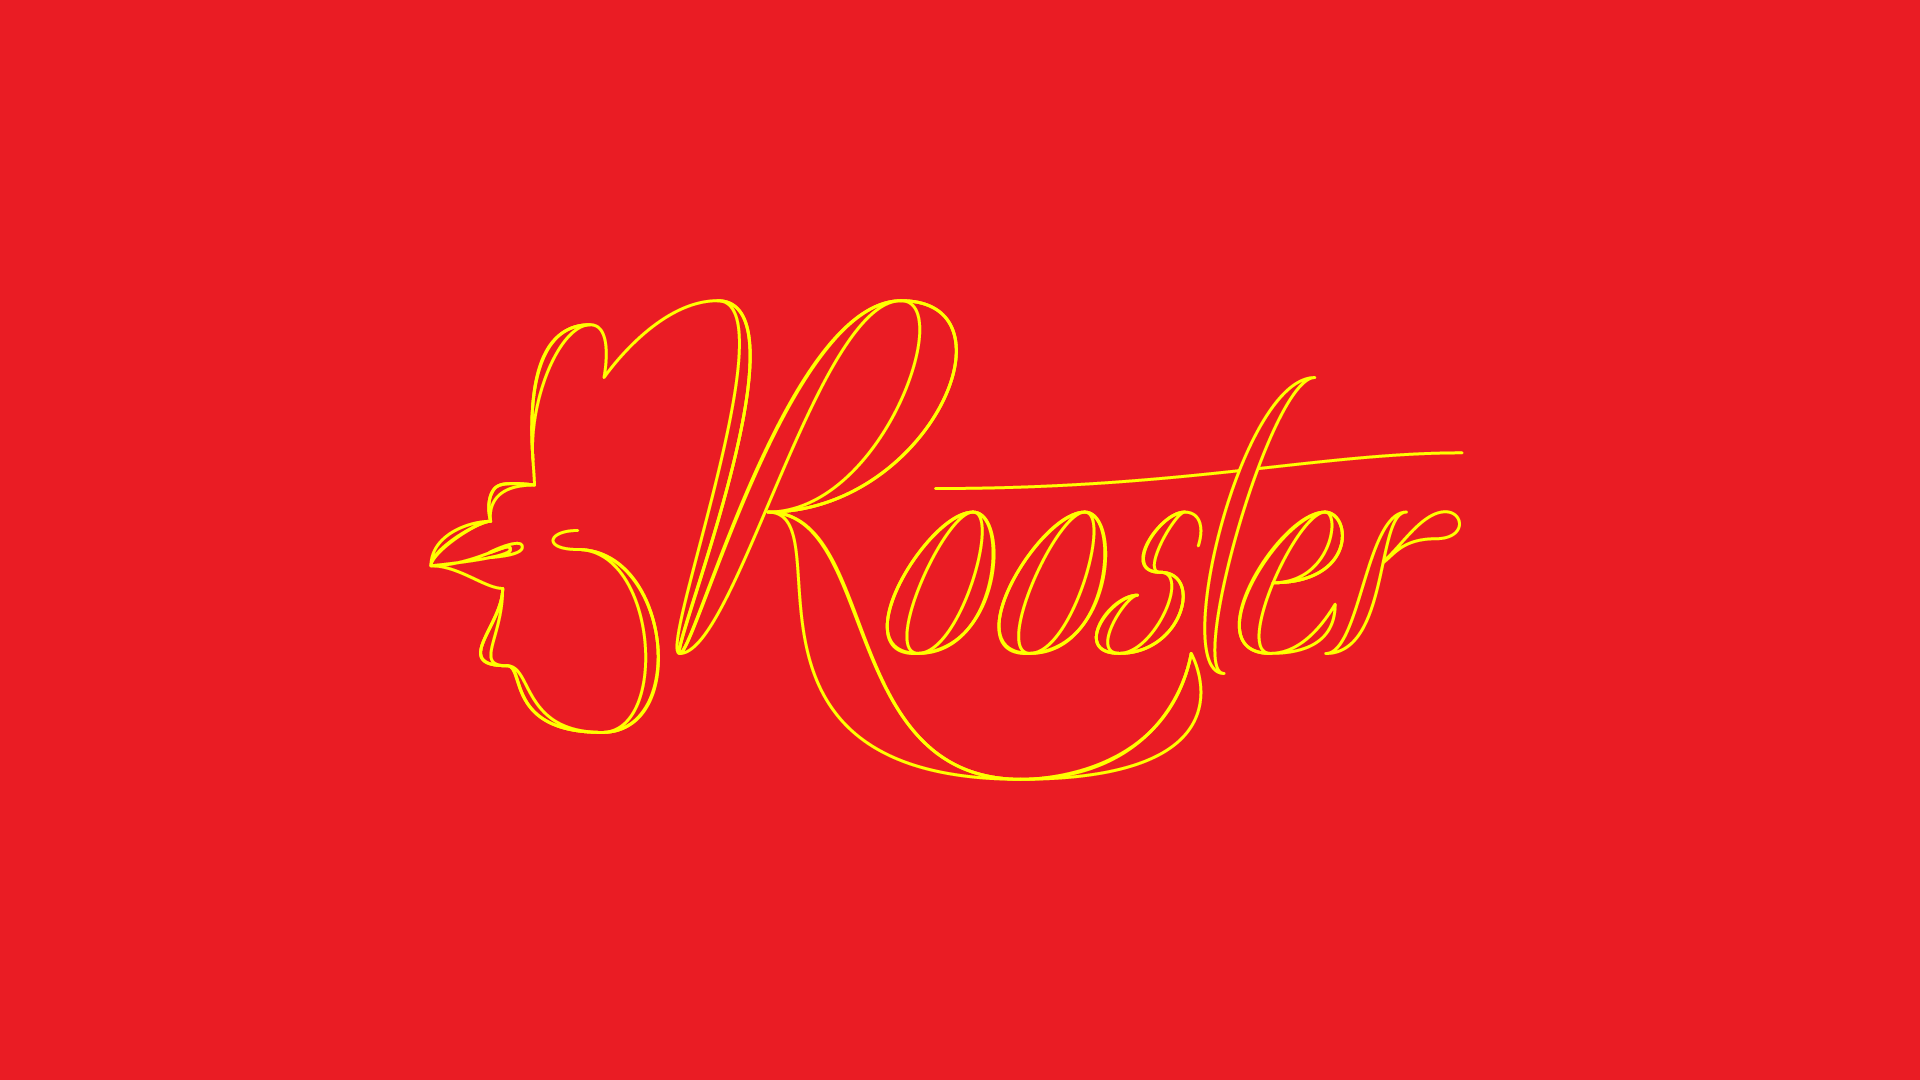 Rooster_001.png